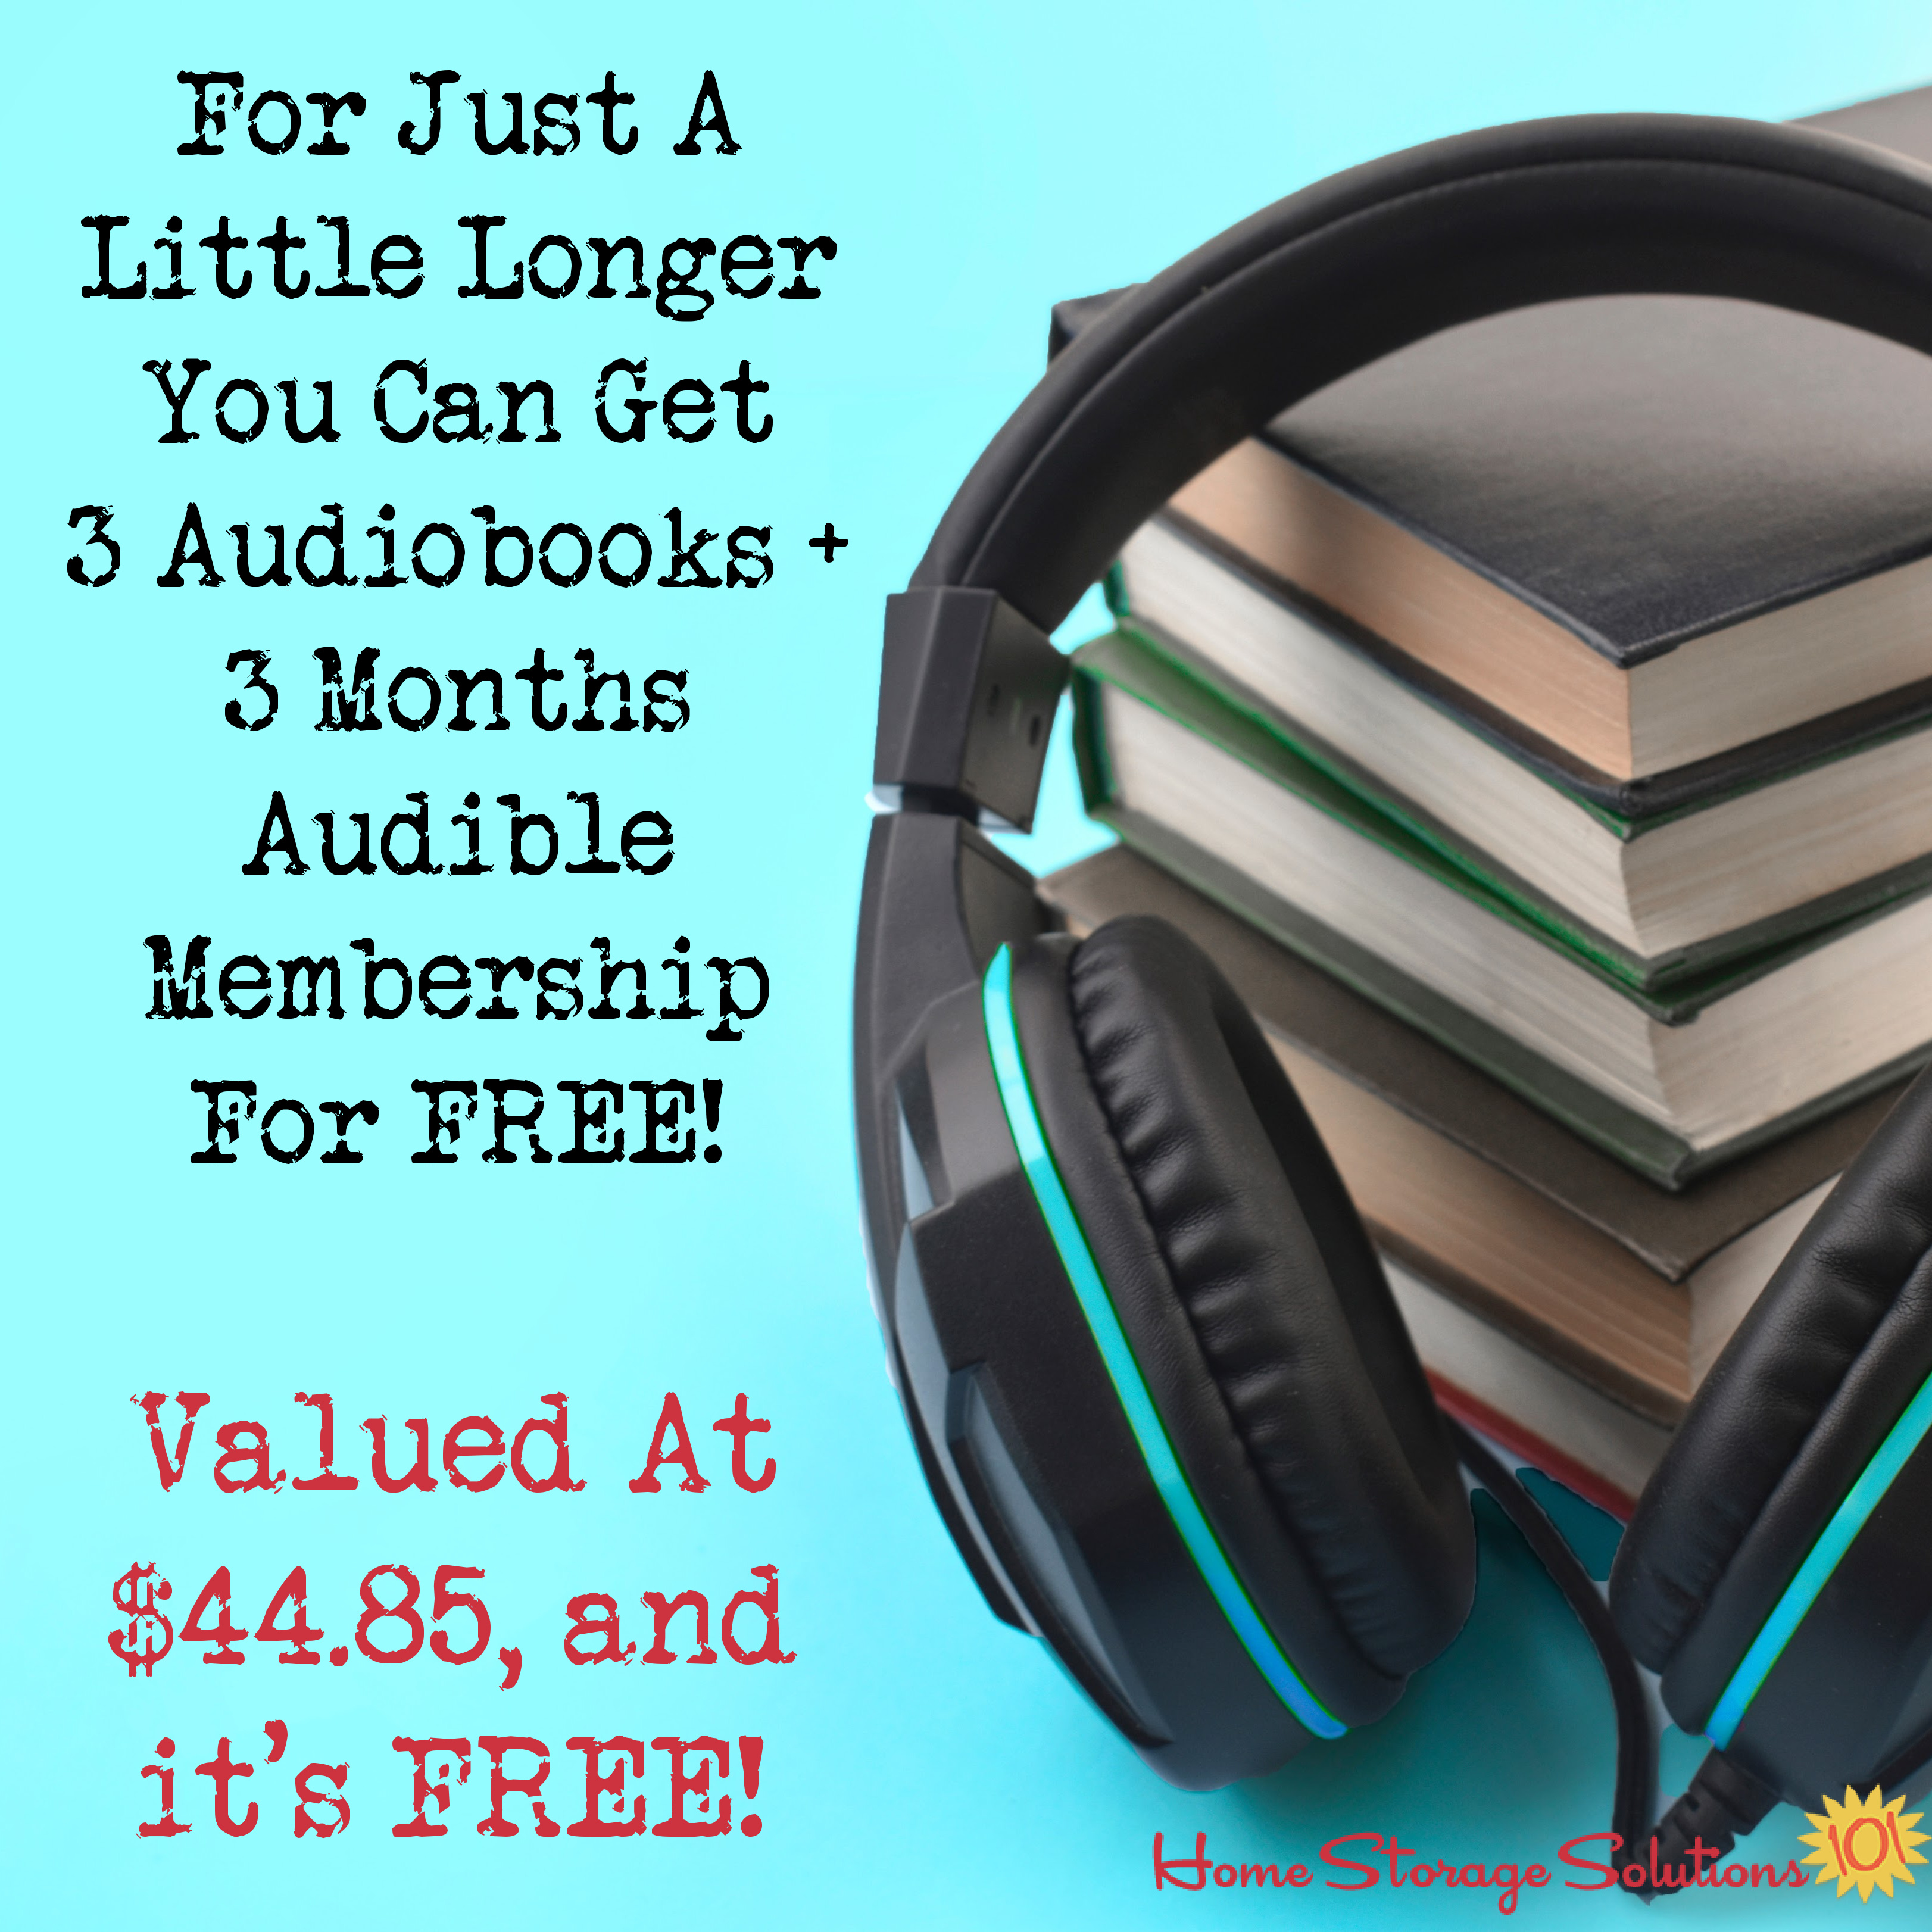 For just a little longer you can get 3 audiobooks plus 3 months Audible membership for FREE